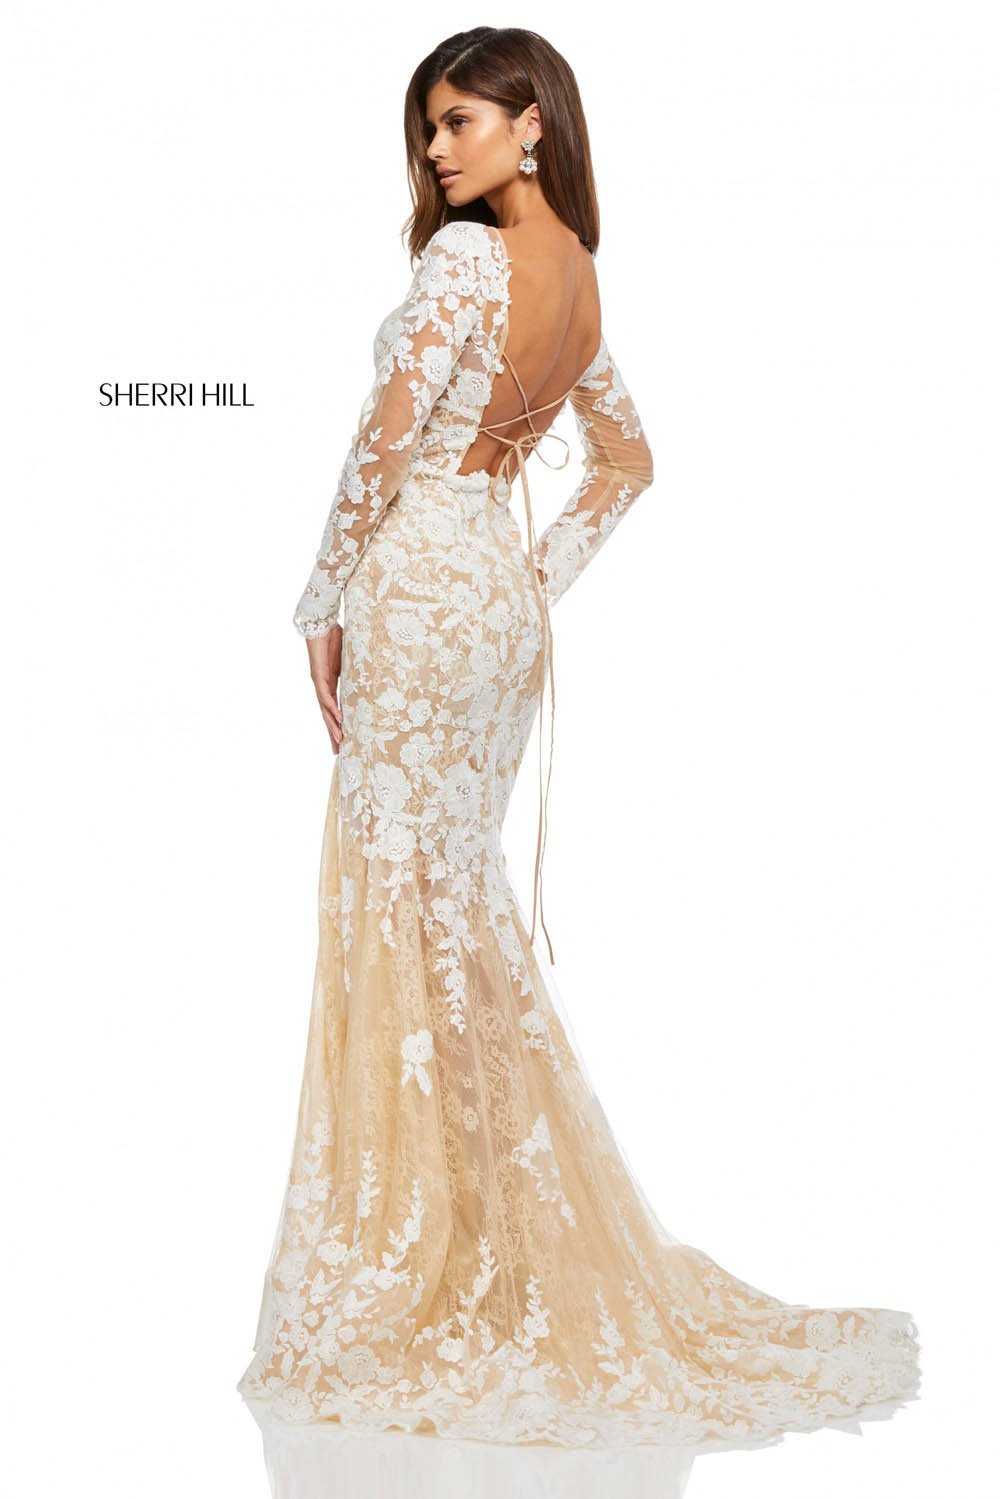 Sherri Hill 52742 dress images in these colors: Ivory.